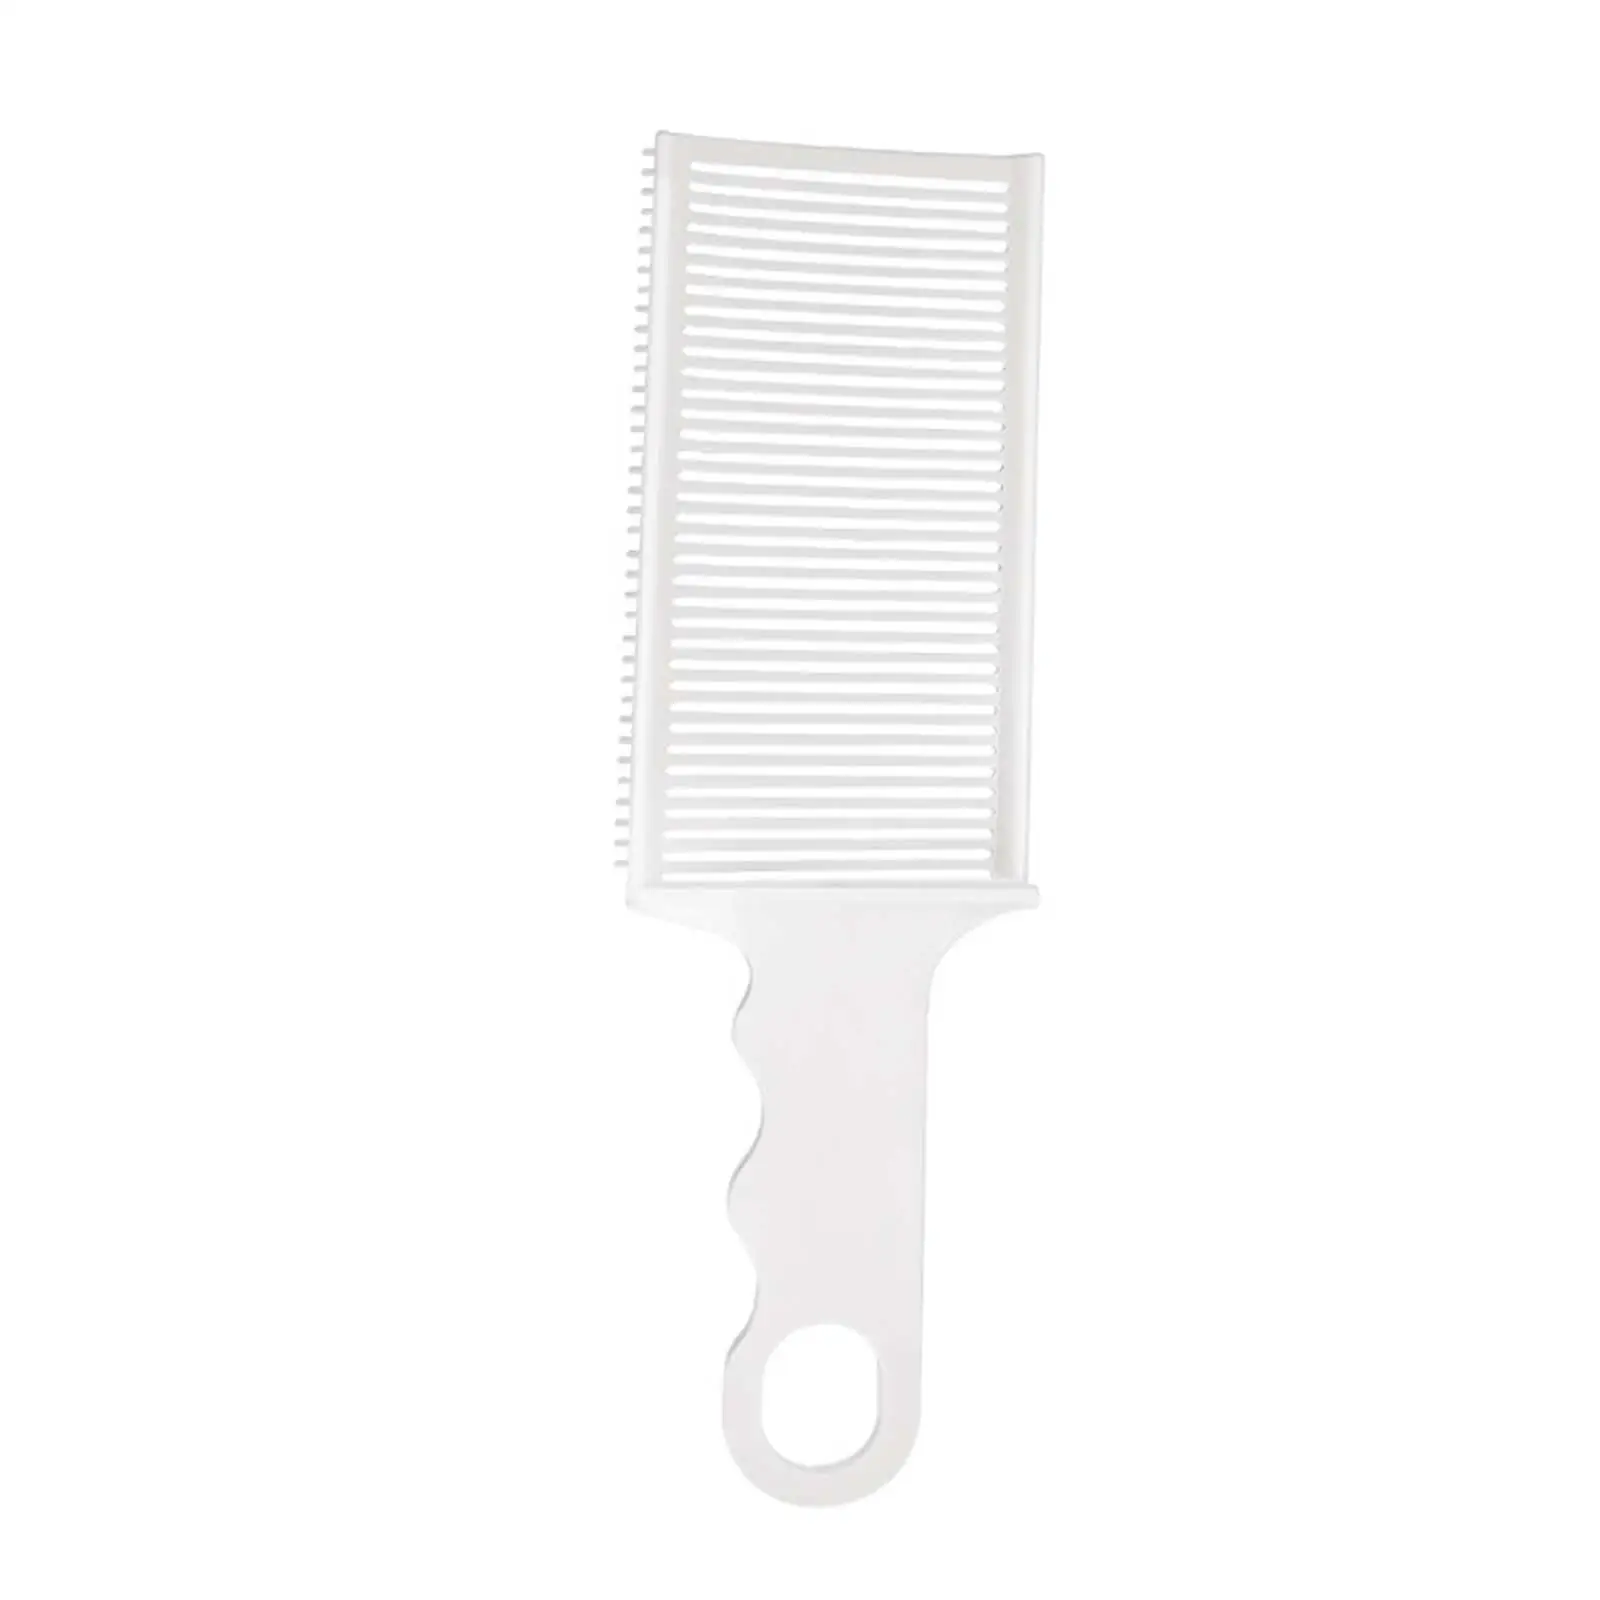 Fade Combs Professional Multipurpose Clipper Comb for Home Salon Hairdresser